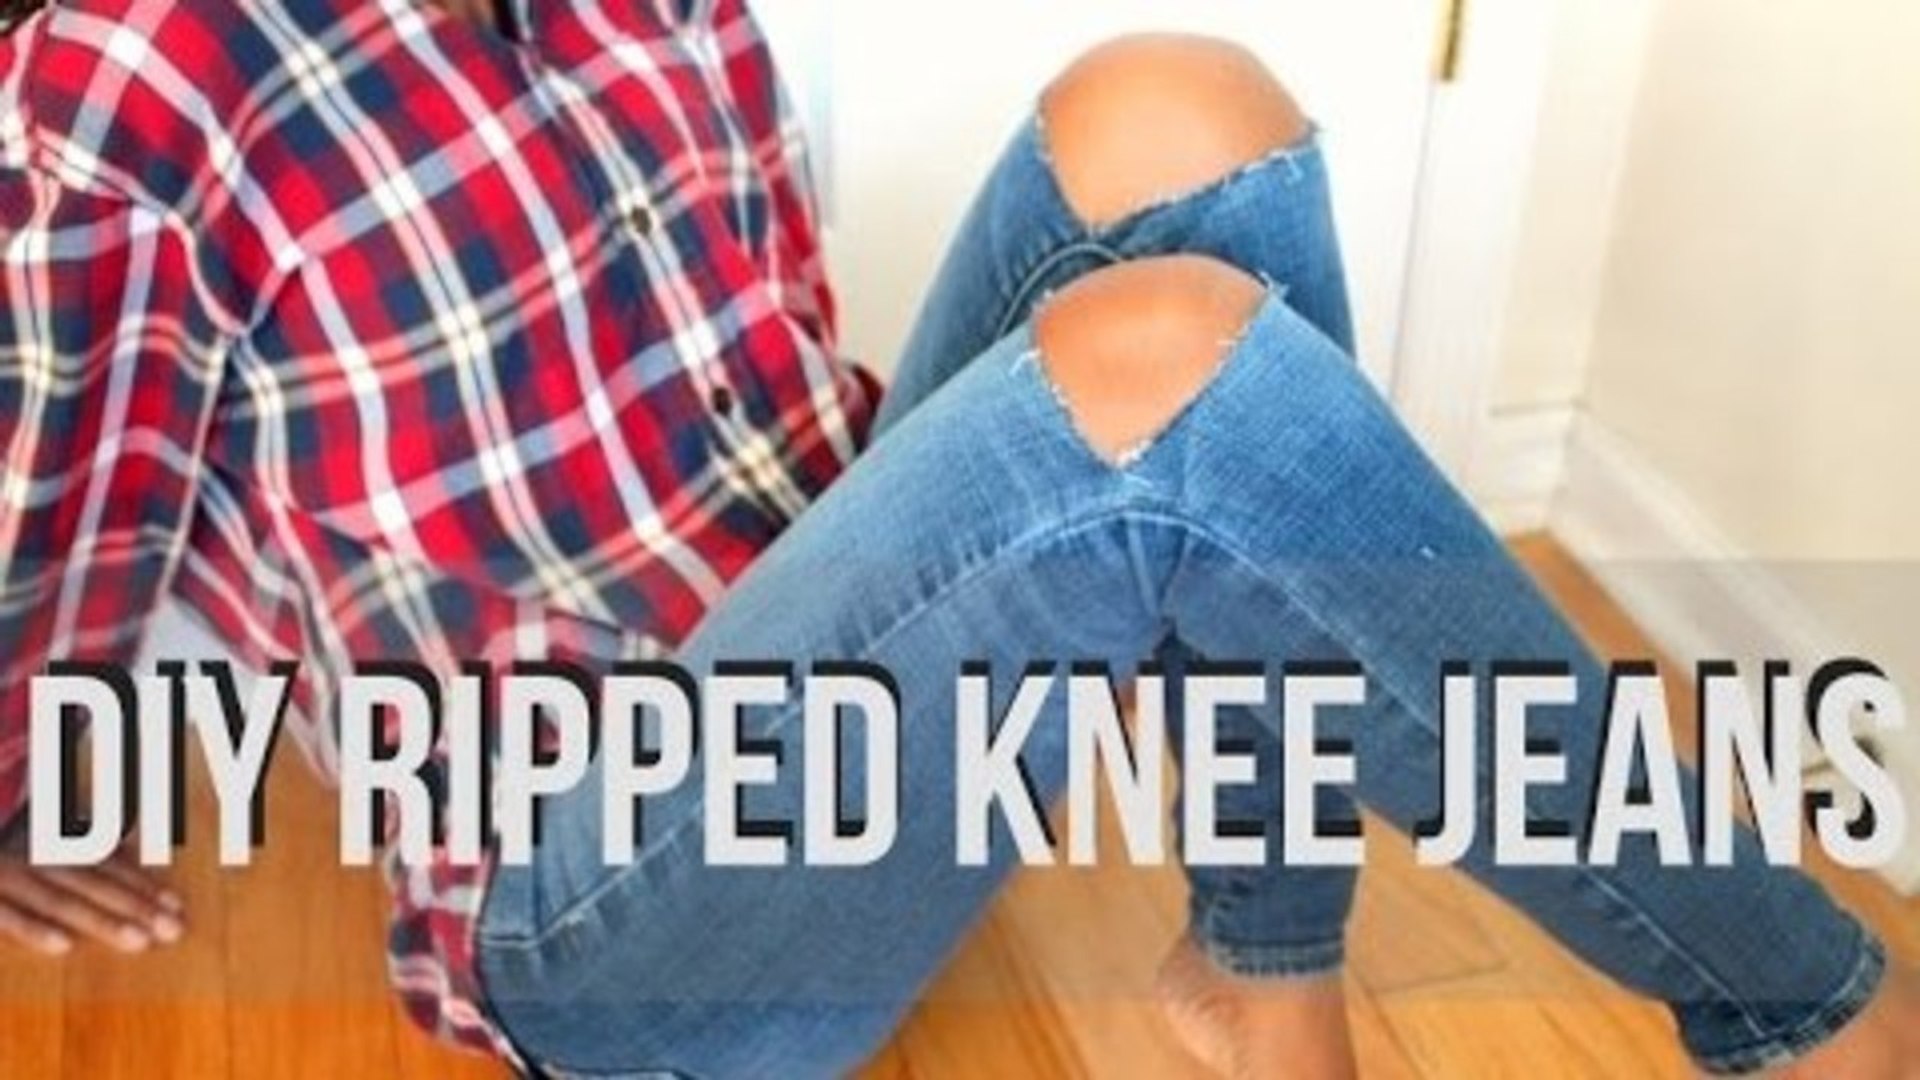 DIY RIPPED KNEE JEANS ✄ - video Dailymotion